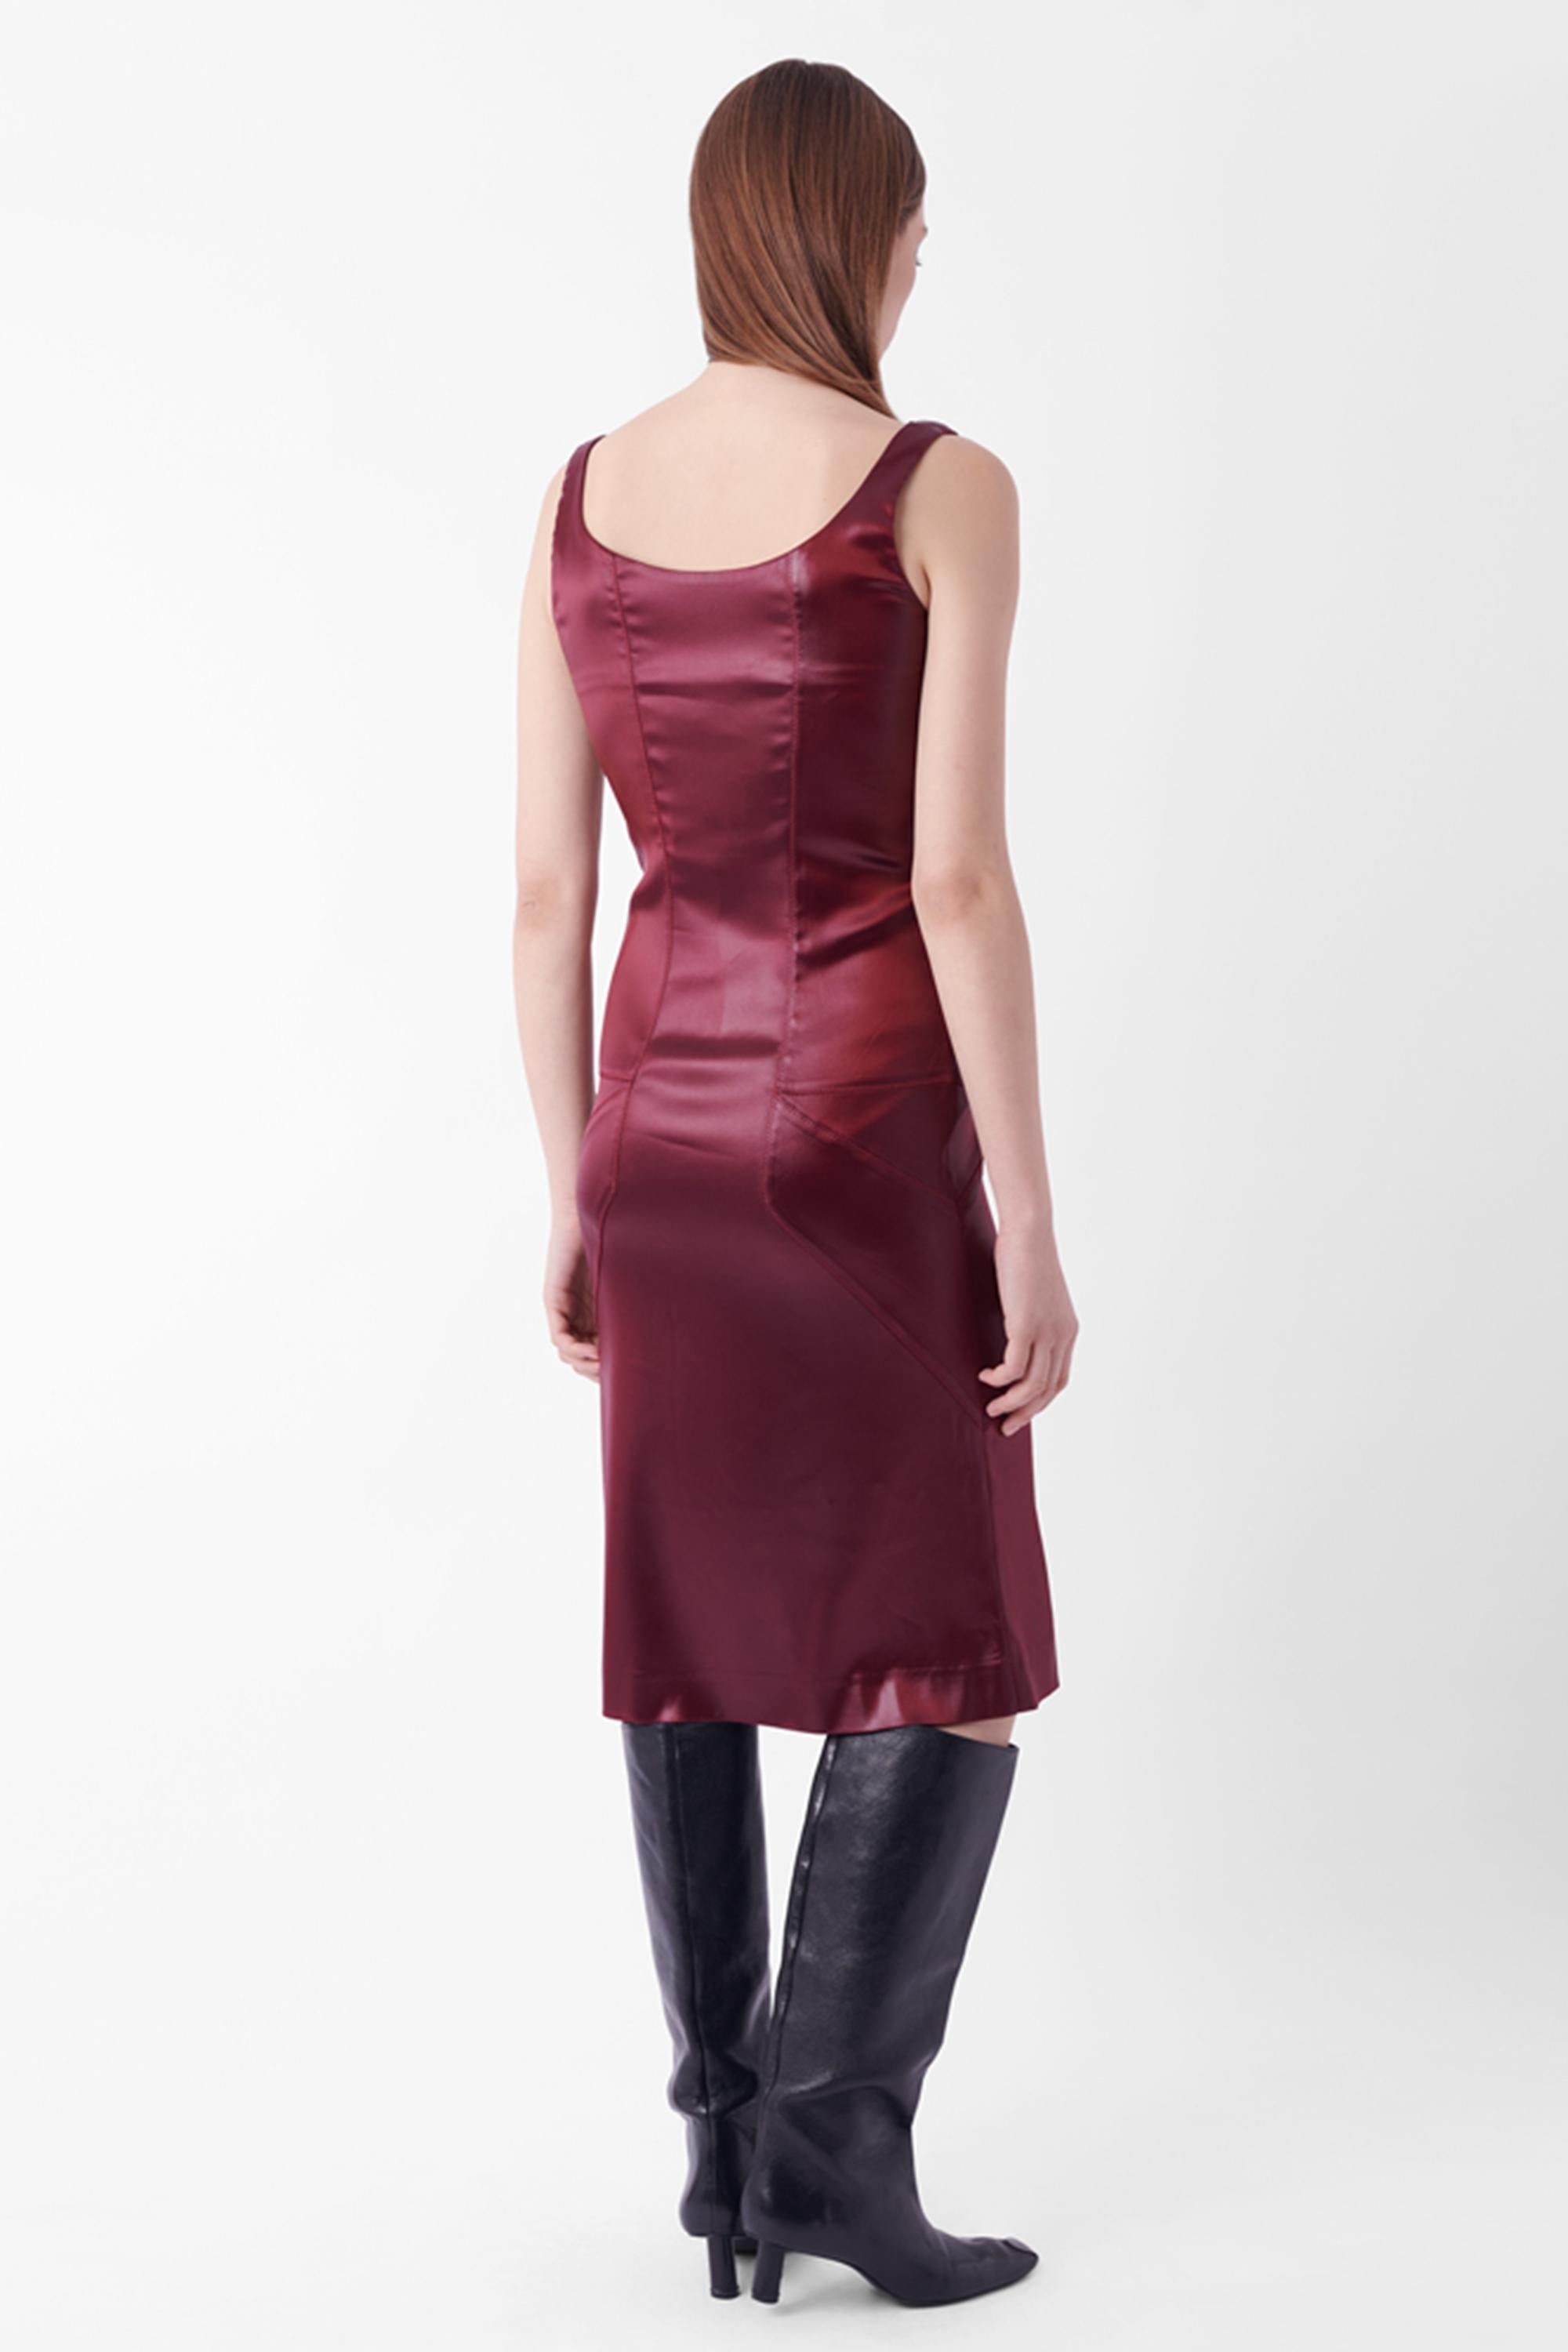 John Galliano Fall Winter 2000 burgundy dress, closing runway look. This runway satin dress features, optional off-shoulder silhouette, stitched detailing and side zip fastening closure. In excellent condition.
Brand: John Galliano
Size: UK